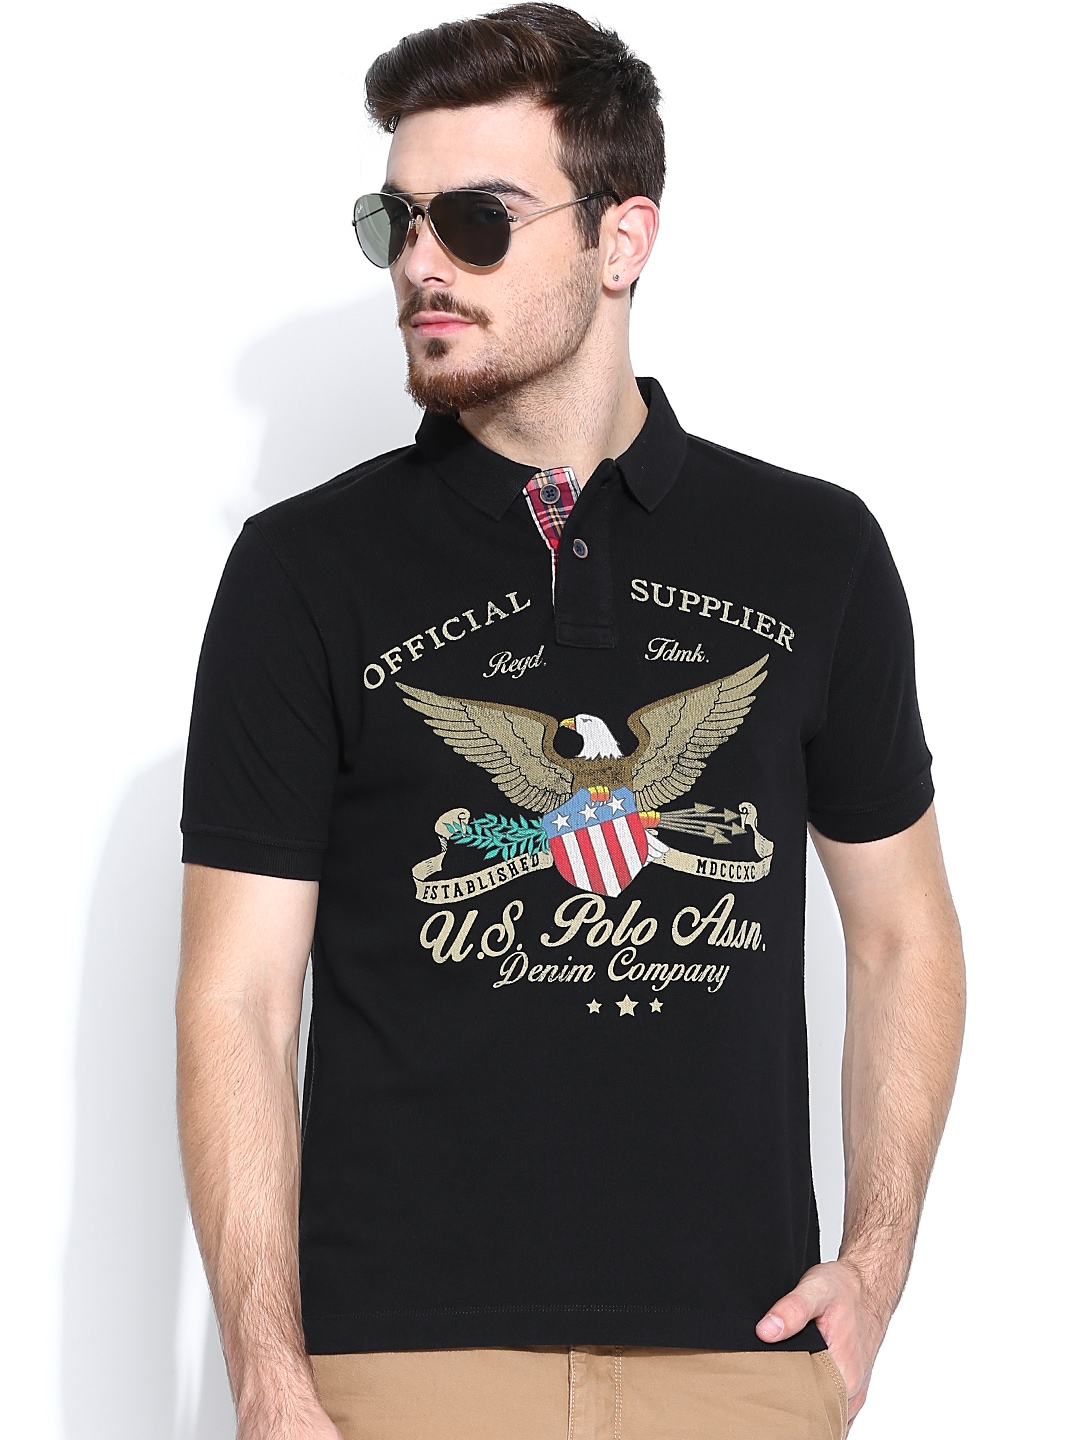 Us polo assn t shirts buy online